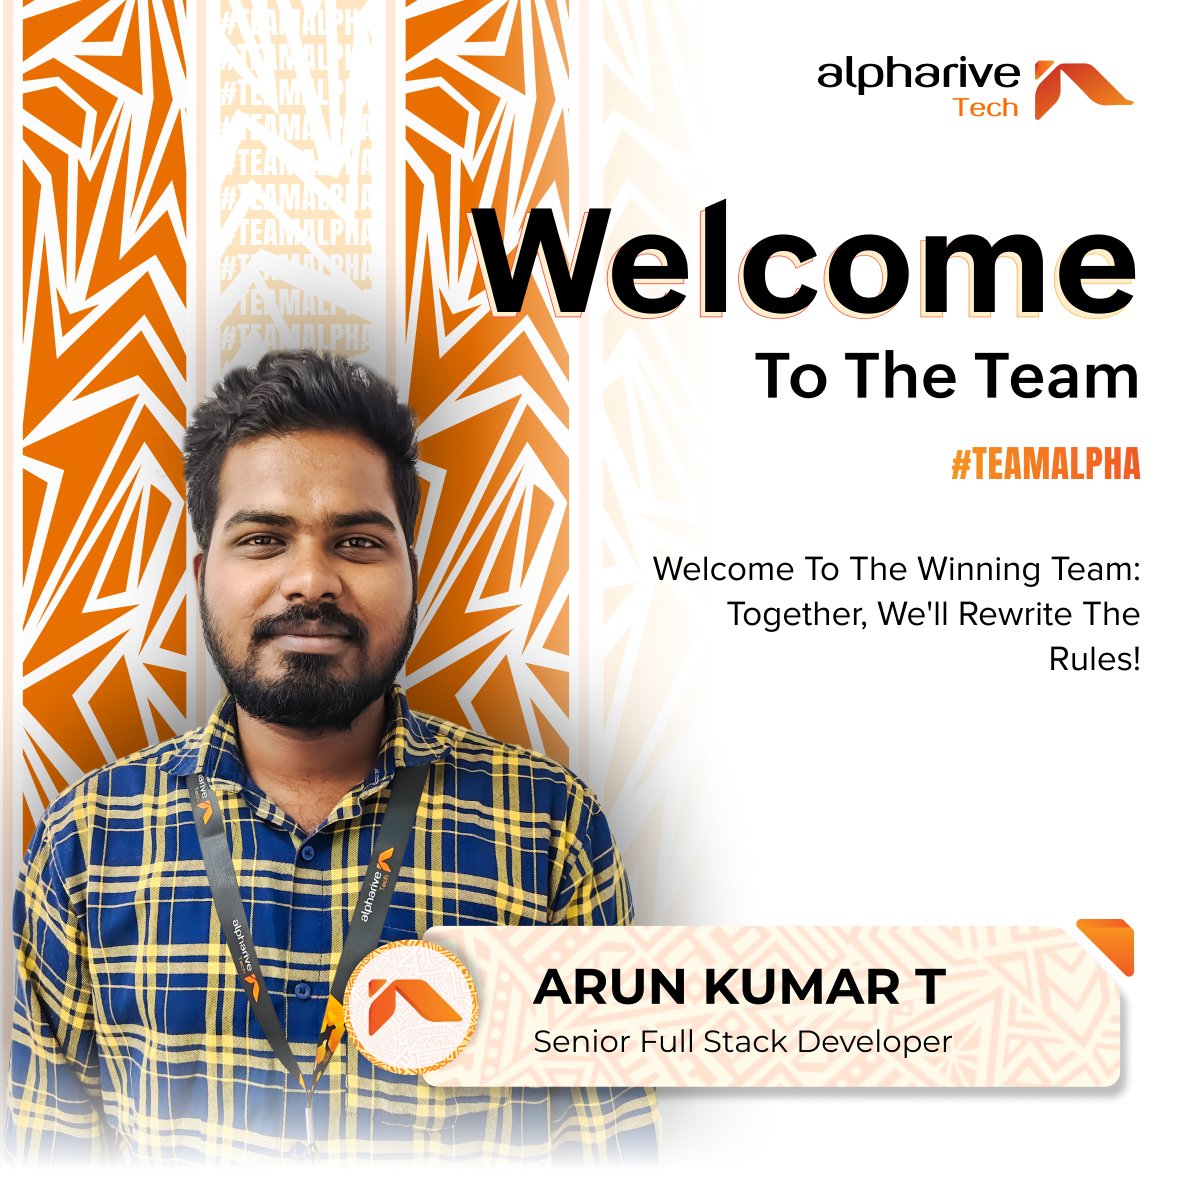 🎉 Welcome Onboard, Mr. Arun Kumar.T! 🚀 Our #alpharive #team just got stronger with Arun as our new Senior Full Stack Developer! 💻 Get ready for innovation like never before! 🔥

#welcomeonboard #welcometotheteam #happy #excited #congratulations #goodwishes #wishes #company